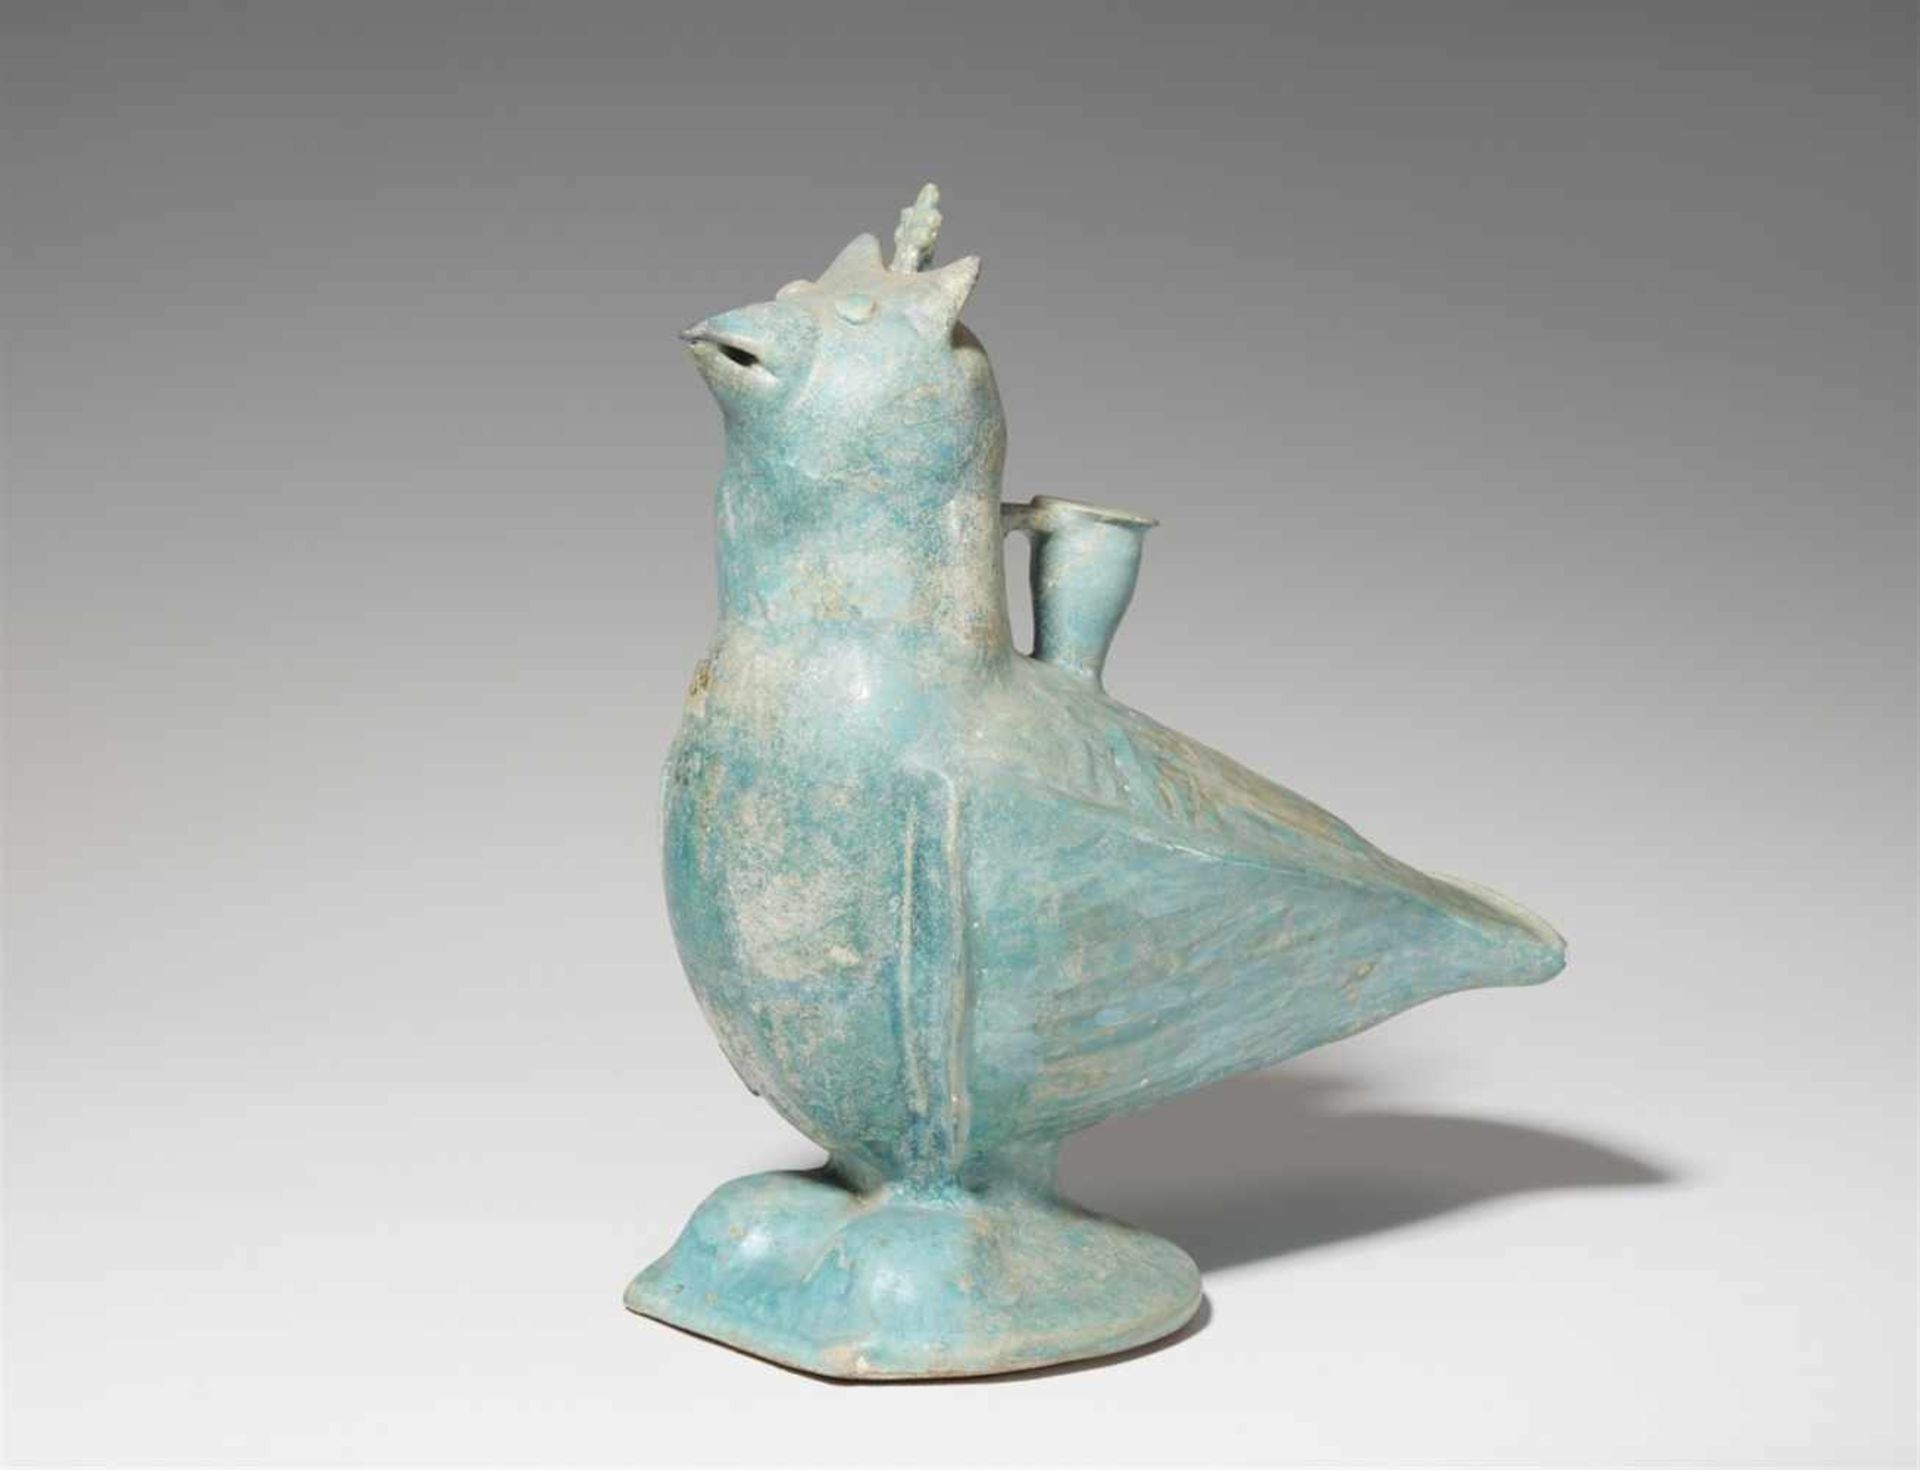 An Iranian fritware model of a birdQuarz frit incense burner with iridescent turquoise glaze. Formed